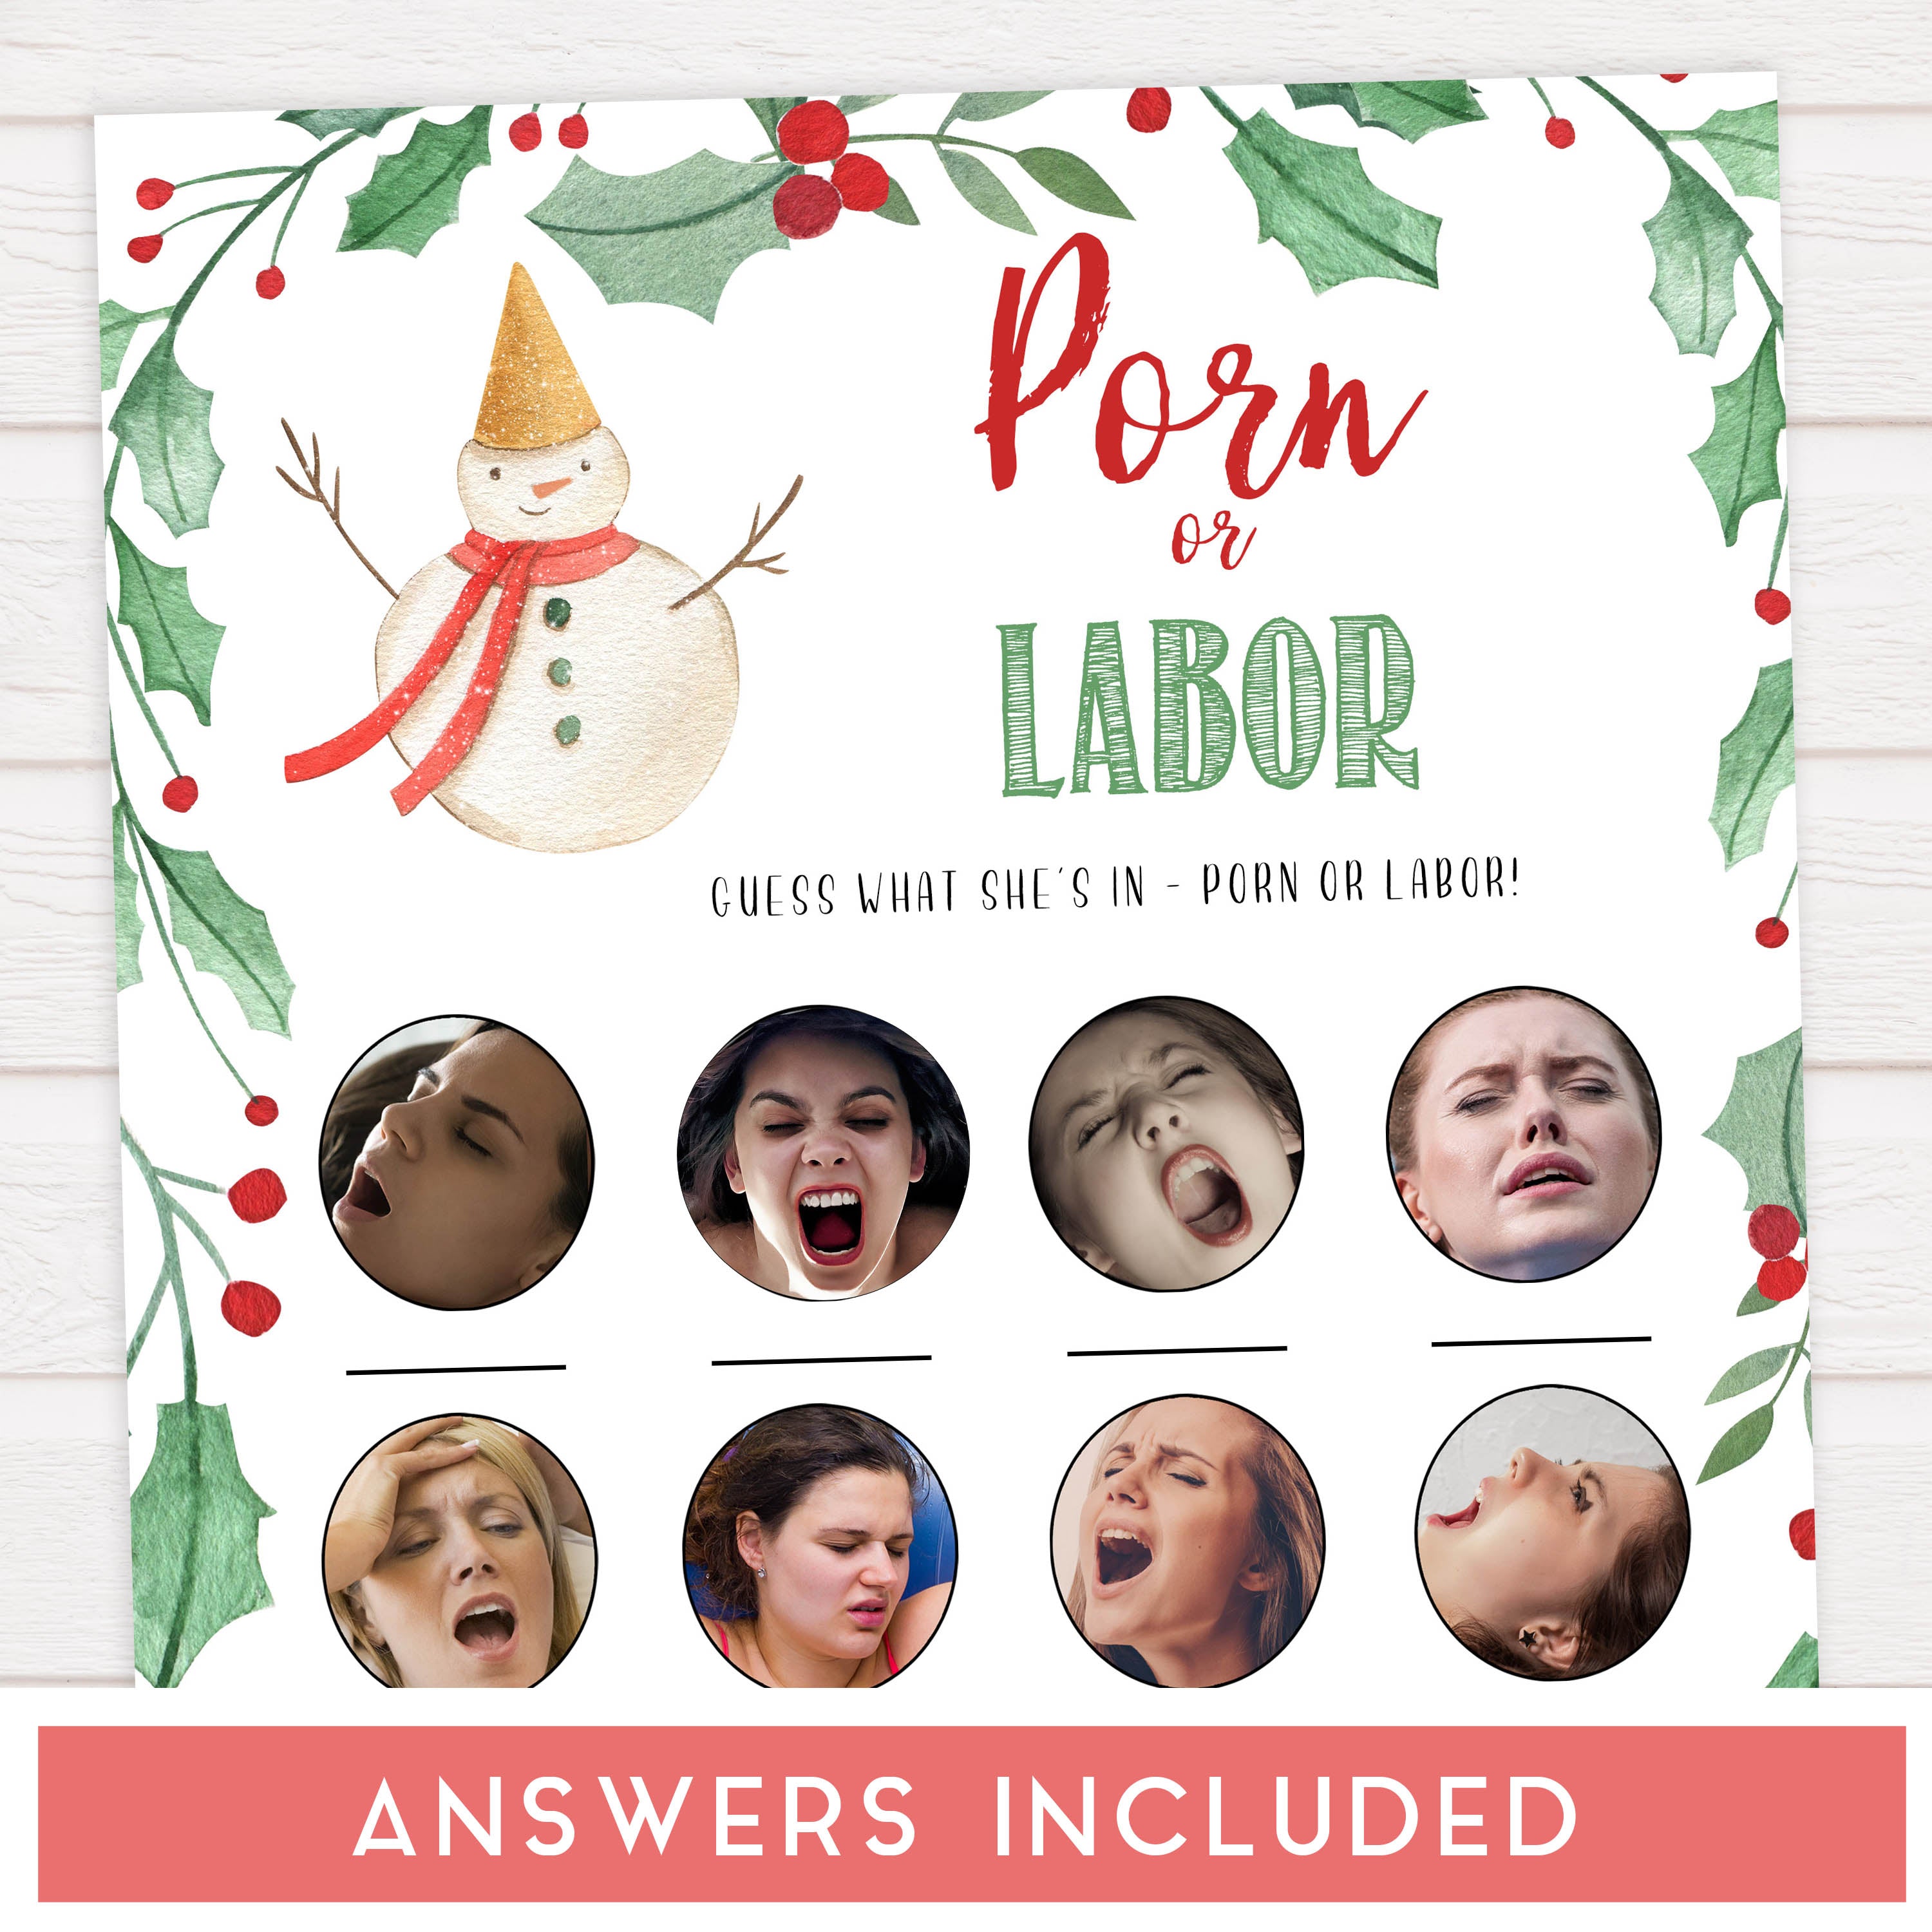 Christmas baby shower games, porn or labor, festive baby shower games, best baby shower games, top 10 baby games, baby shower ideas, baby shower games